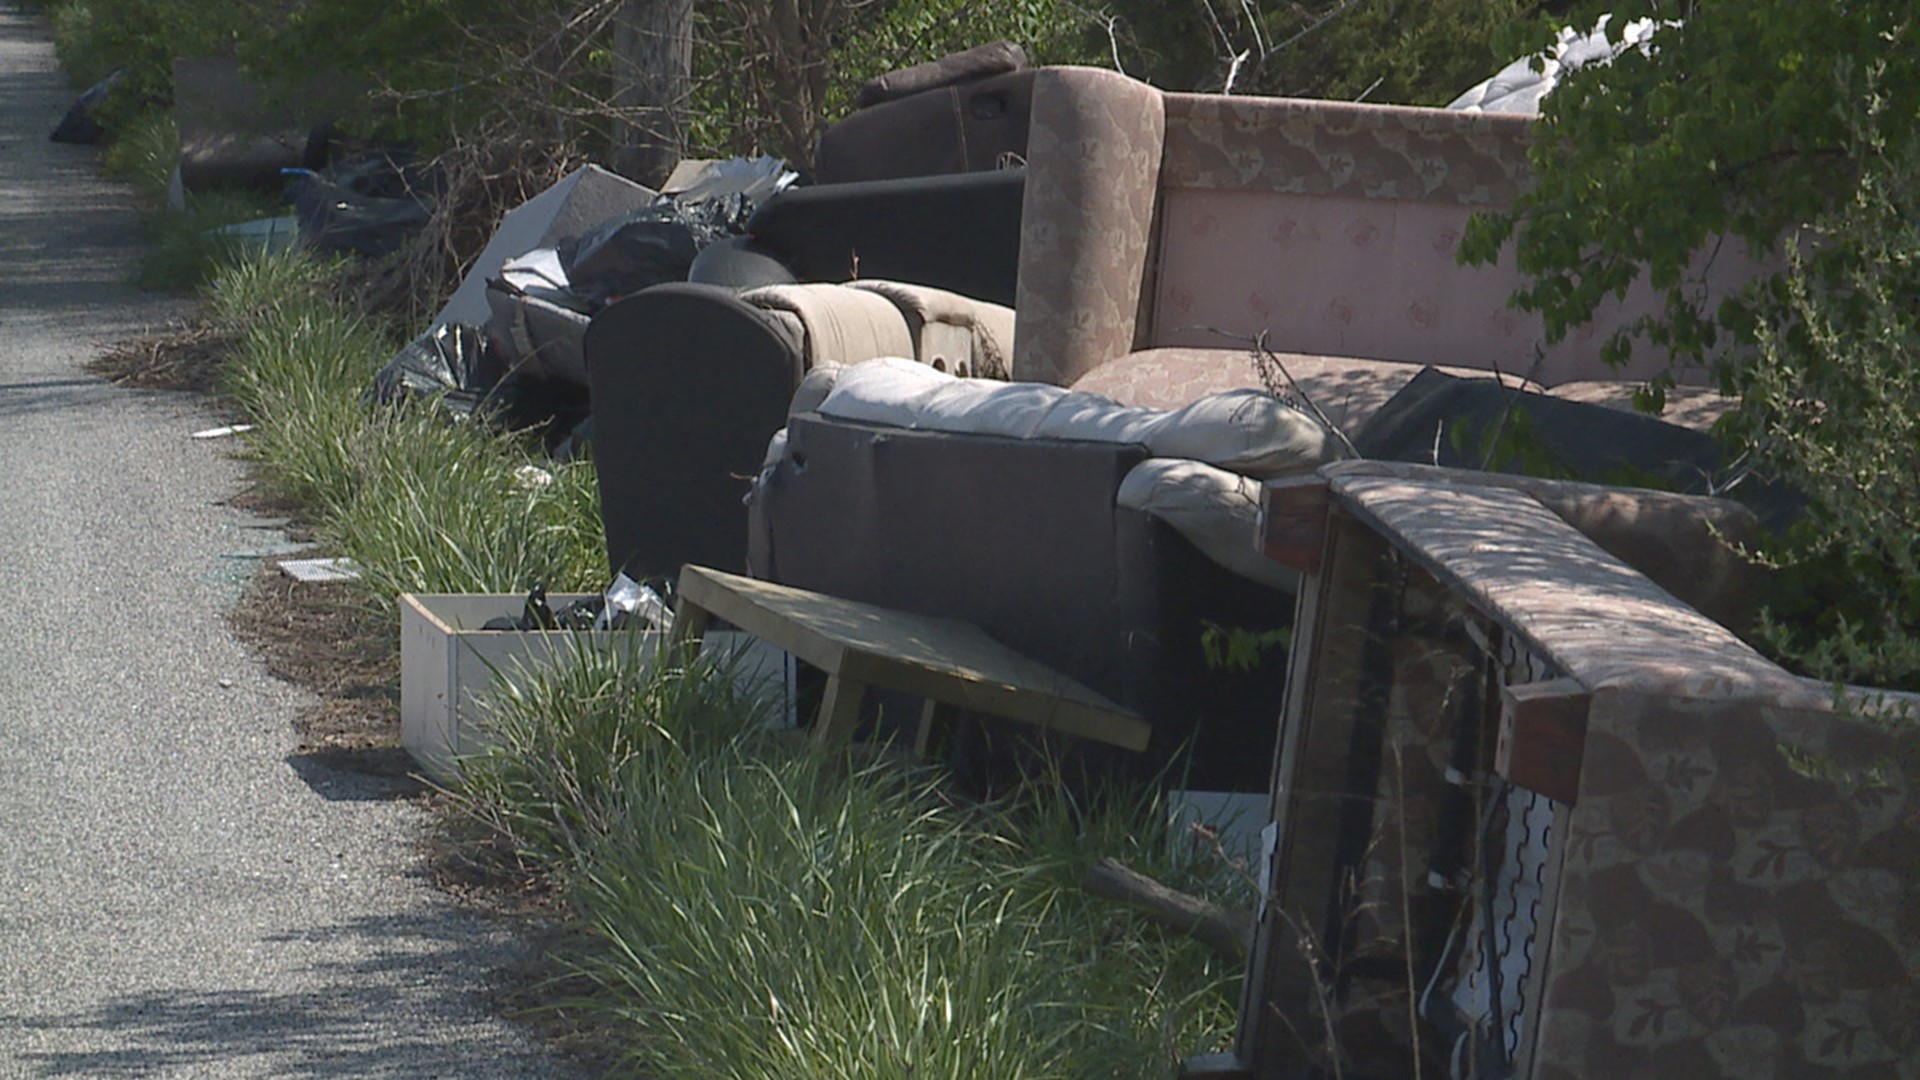 Illegal dumping is an issue that's impacted a property in West Manchester Township for decades that’s now raising the question of who is responsible for clean up.